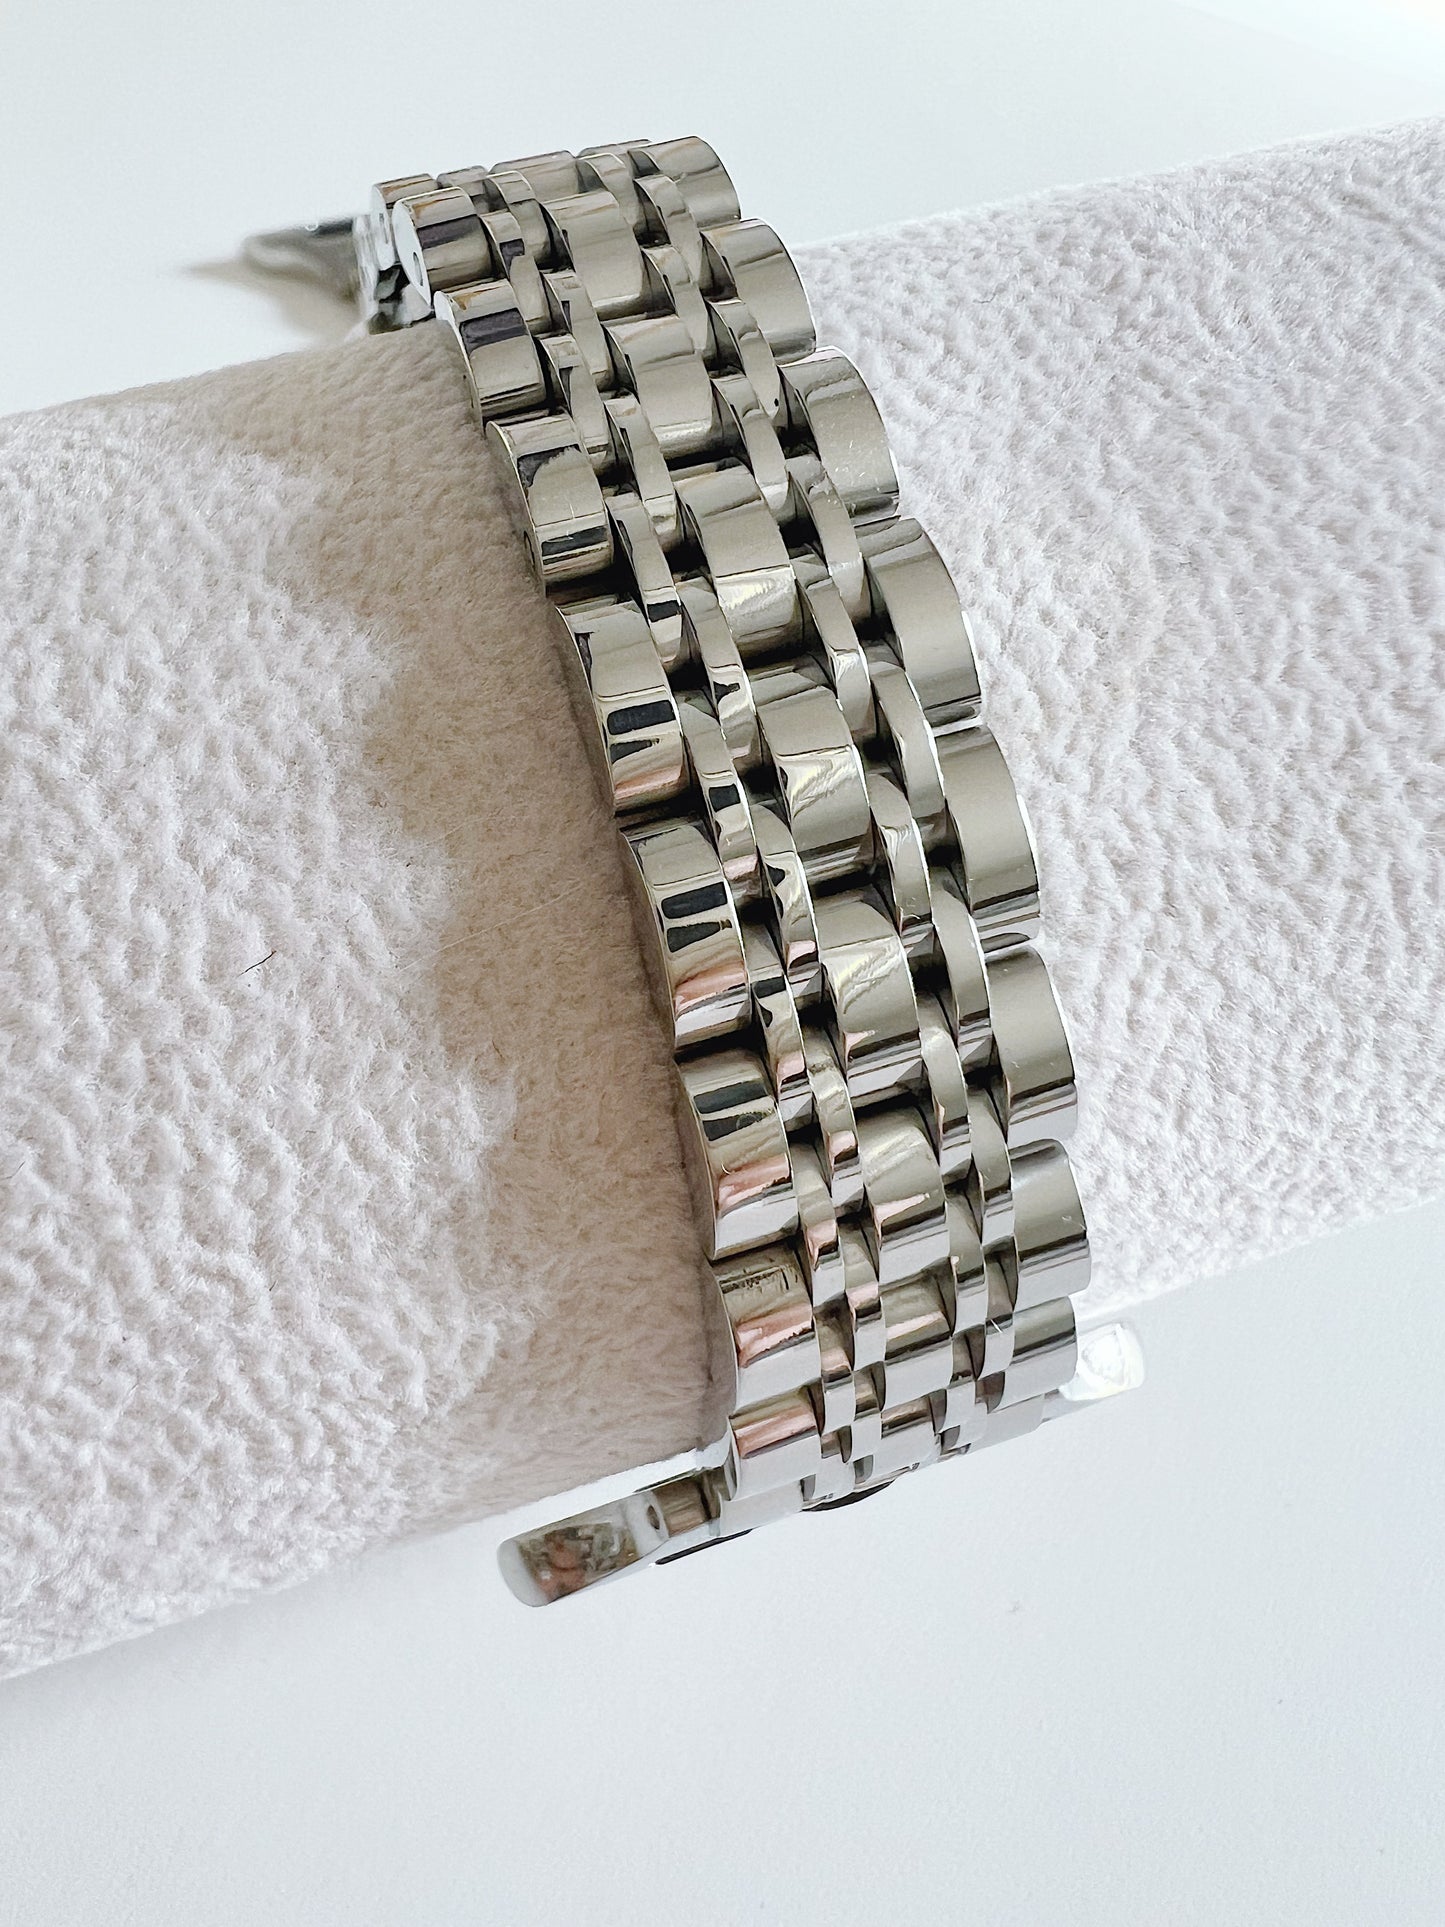 Classic Stainless Steel Watch Band